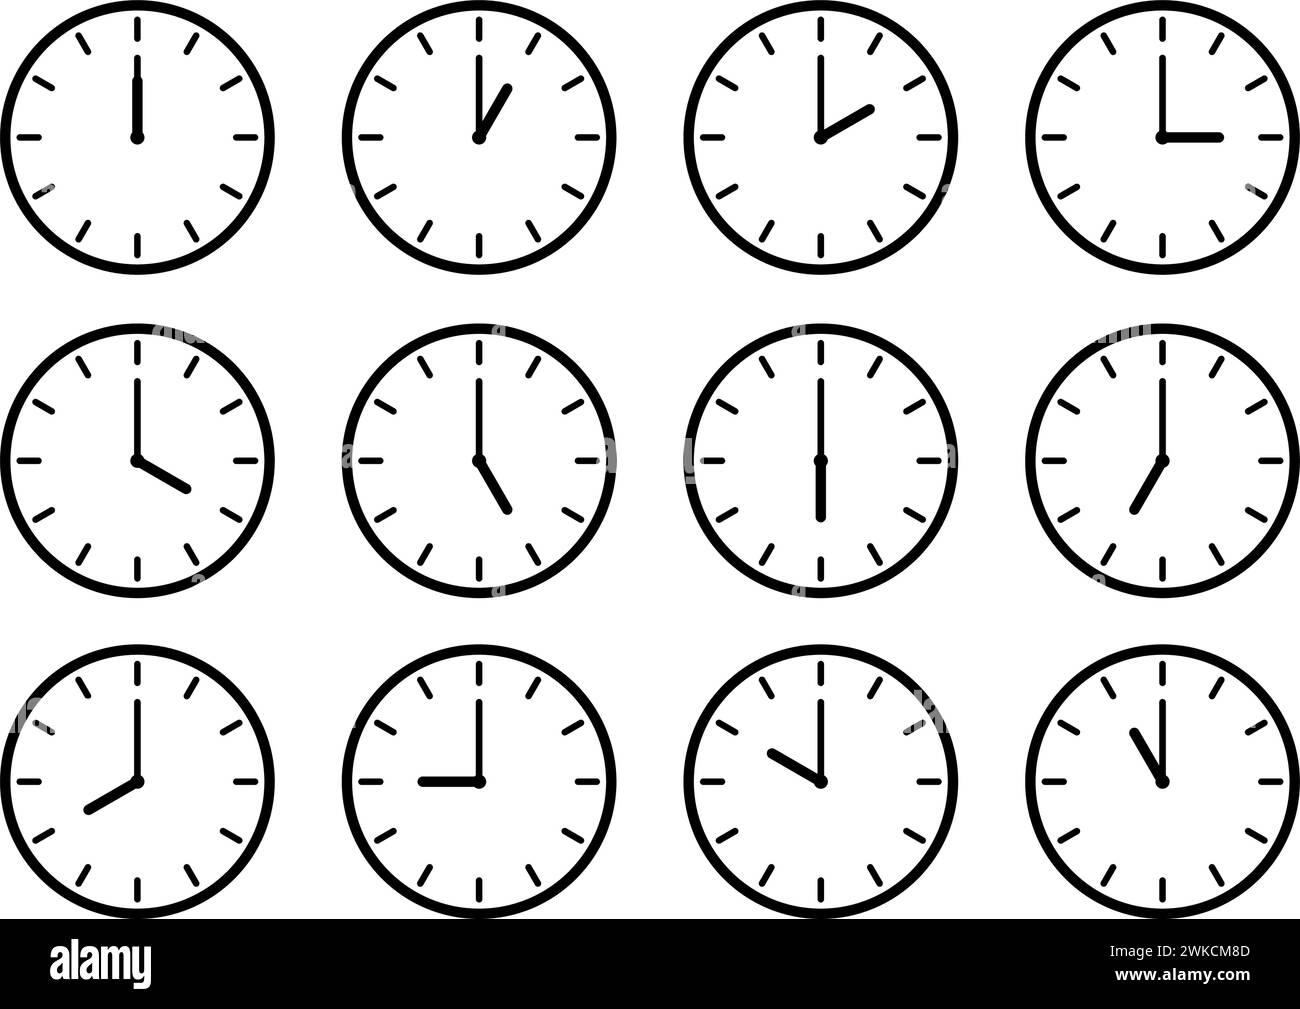 Clocks hands icon. Time sign for every hour. Stopwatch, clock faces set. Evening, morning and noon time. Simple hour icons. Vector illustration Stock Vector